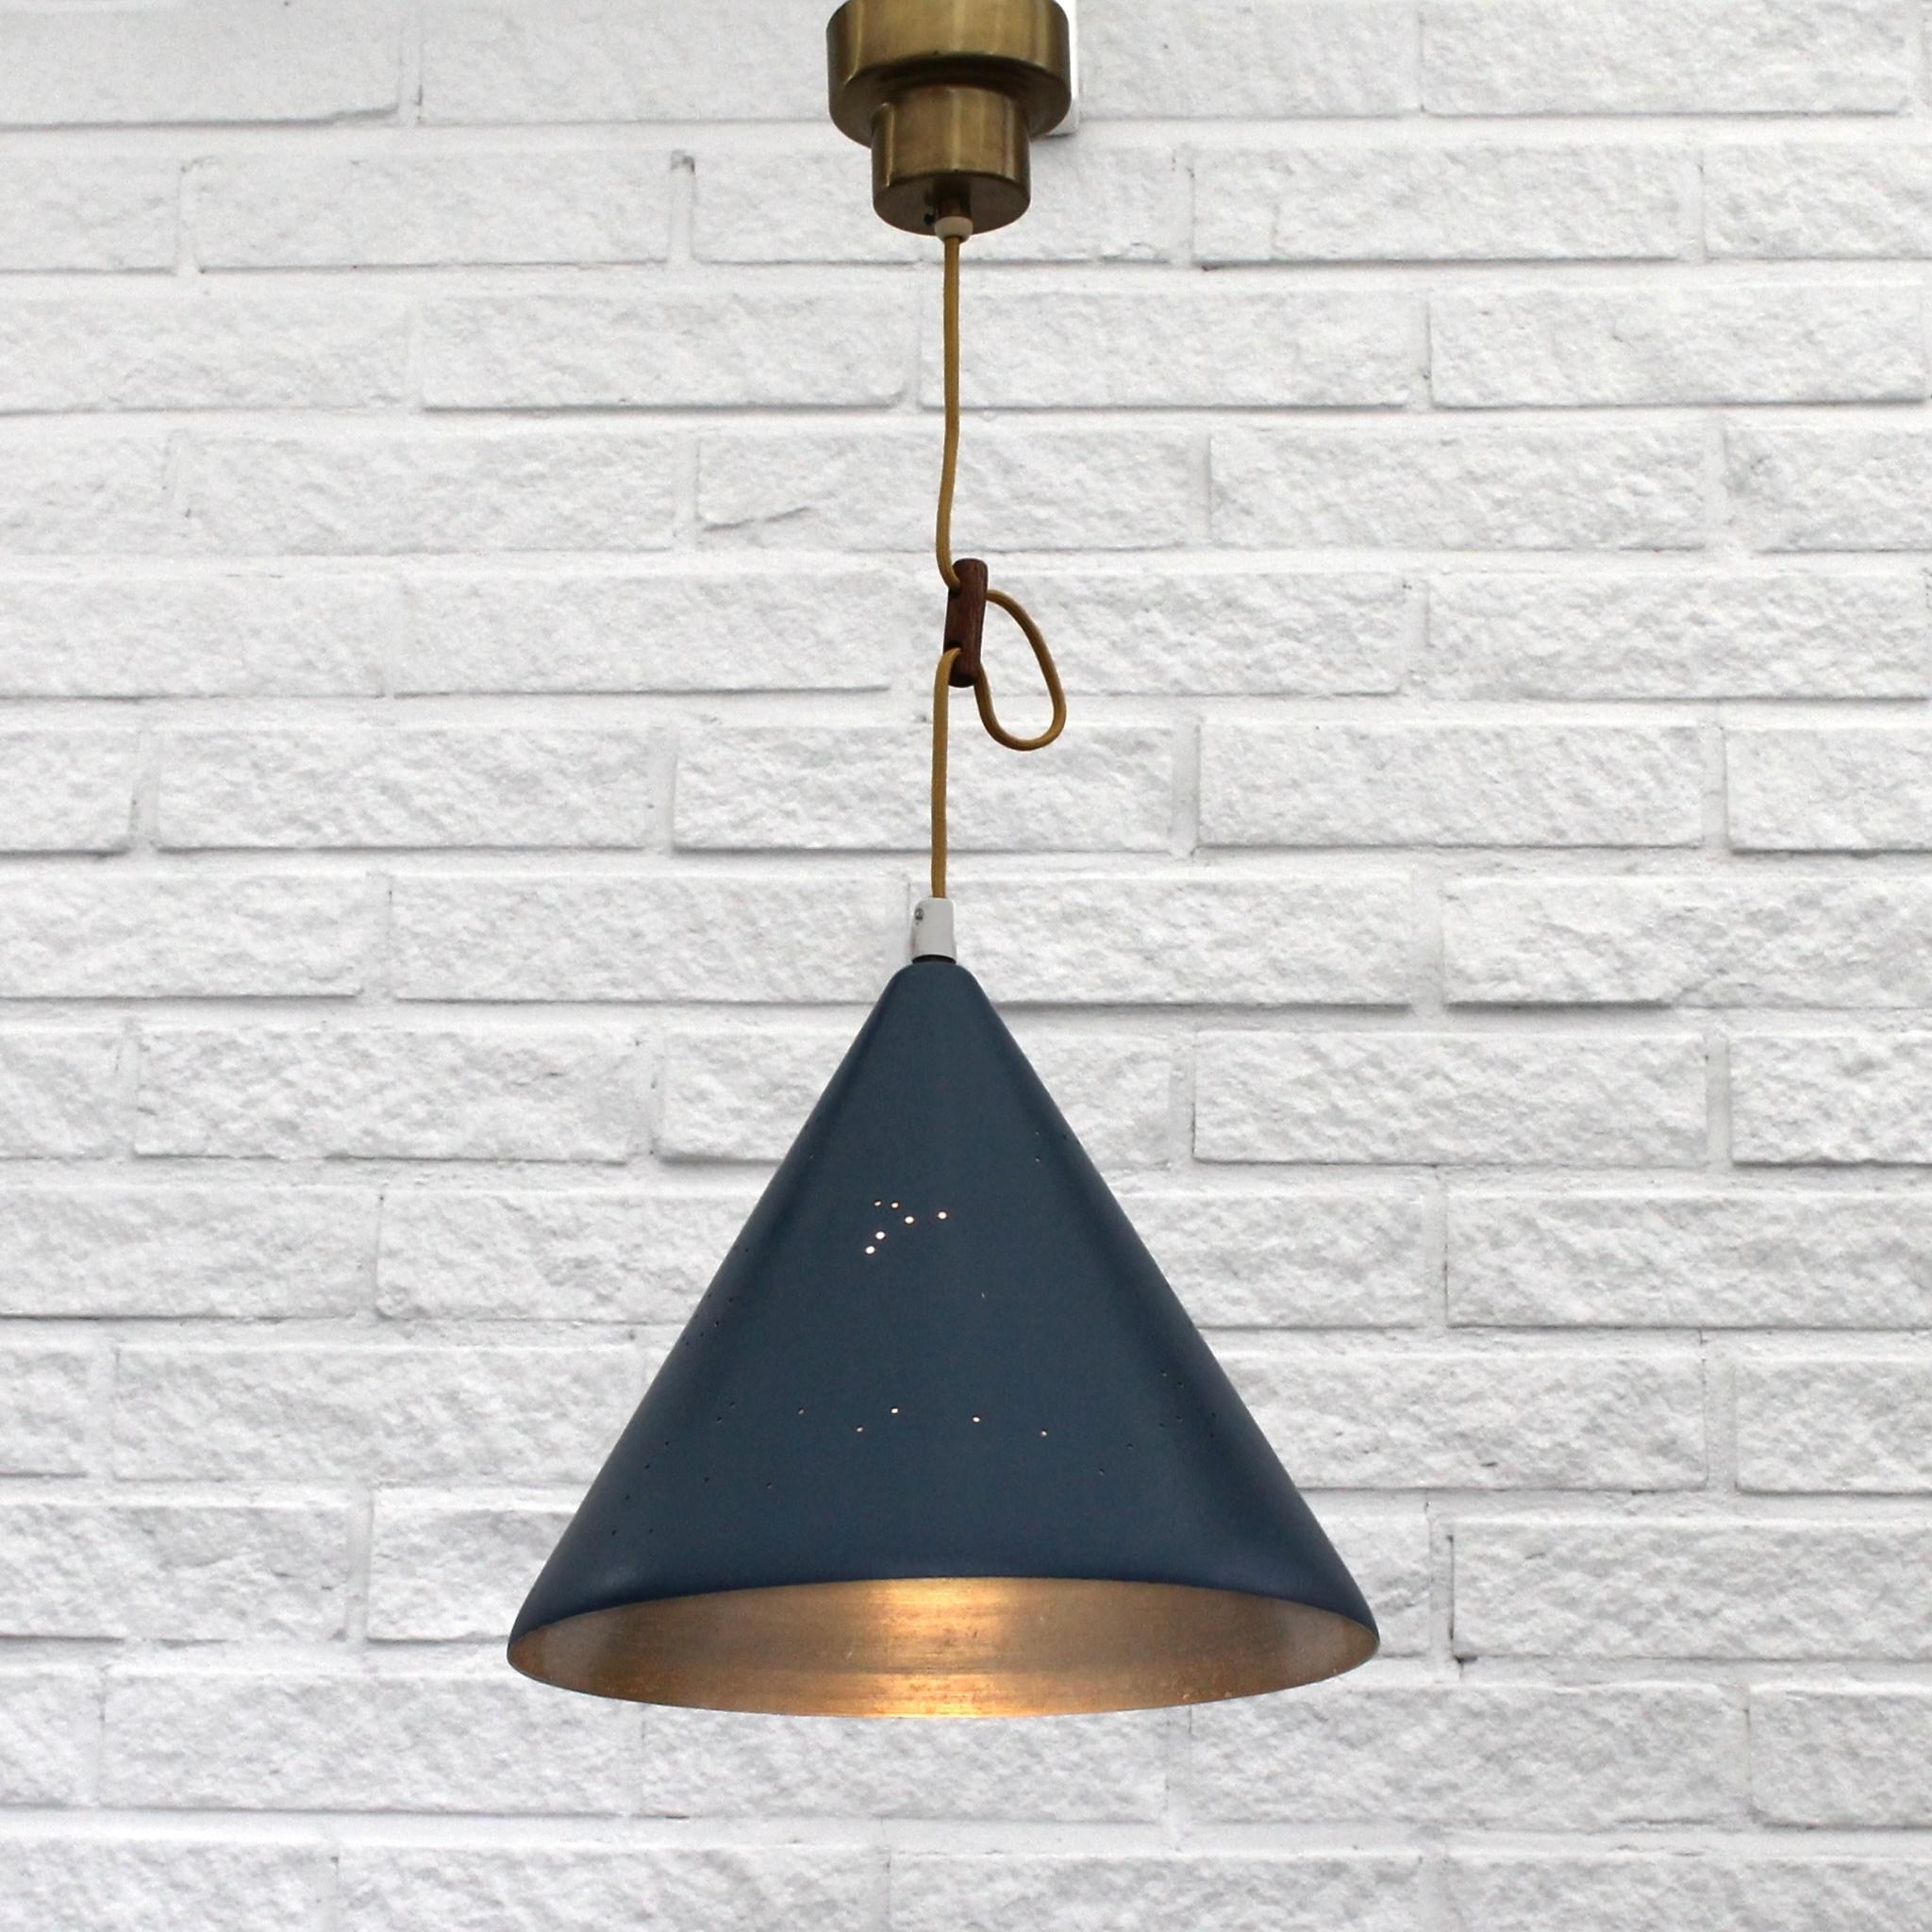 Swedish mid-century cone-shaped pendant lamp with intricate star constellations and a crescent moon perforated in the metal. It features a wooden cable shortener and a brass canopy. This lamp stands as a beautiful example of Scandinavian playful